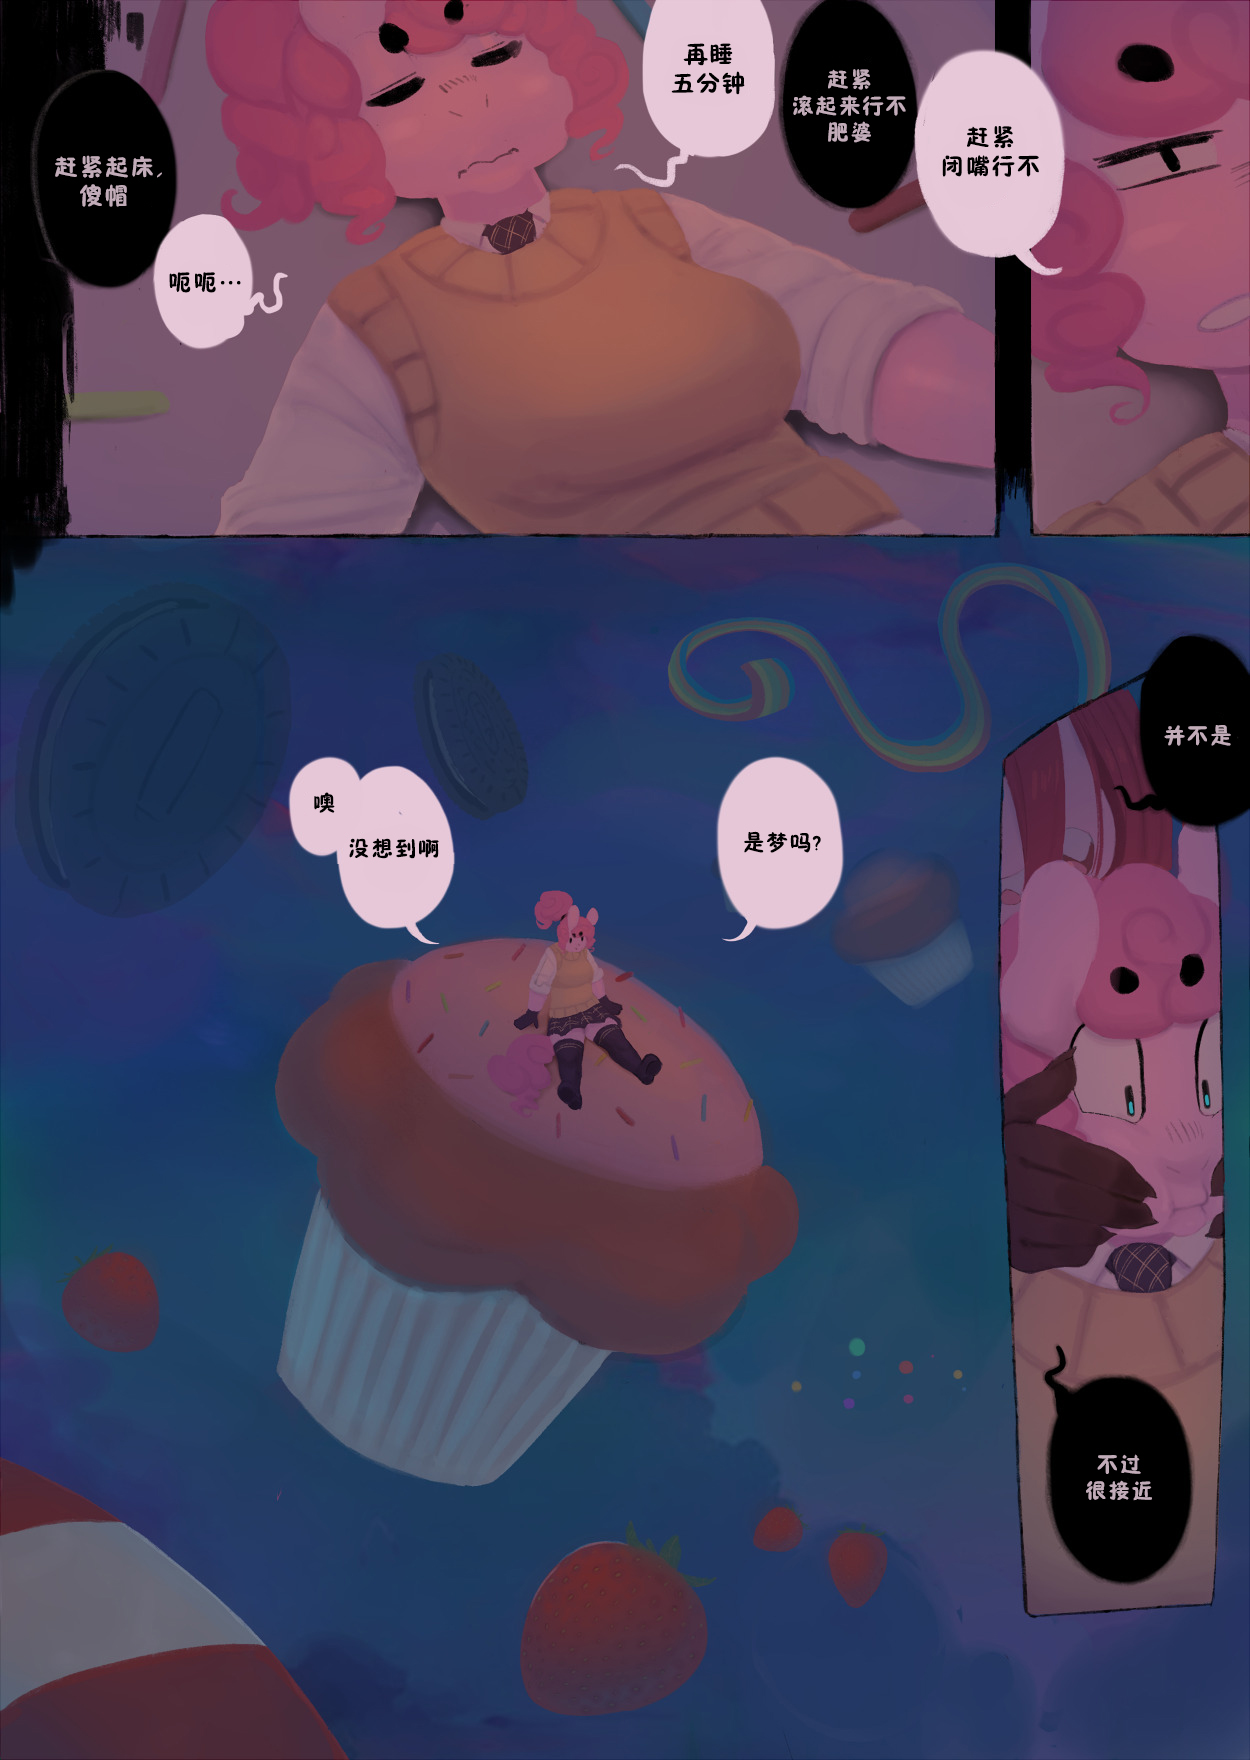 [Lumo] Pony Academy, Chapter 6: Candy Core [Completed] [Chinese] 